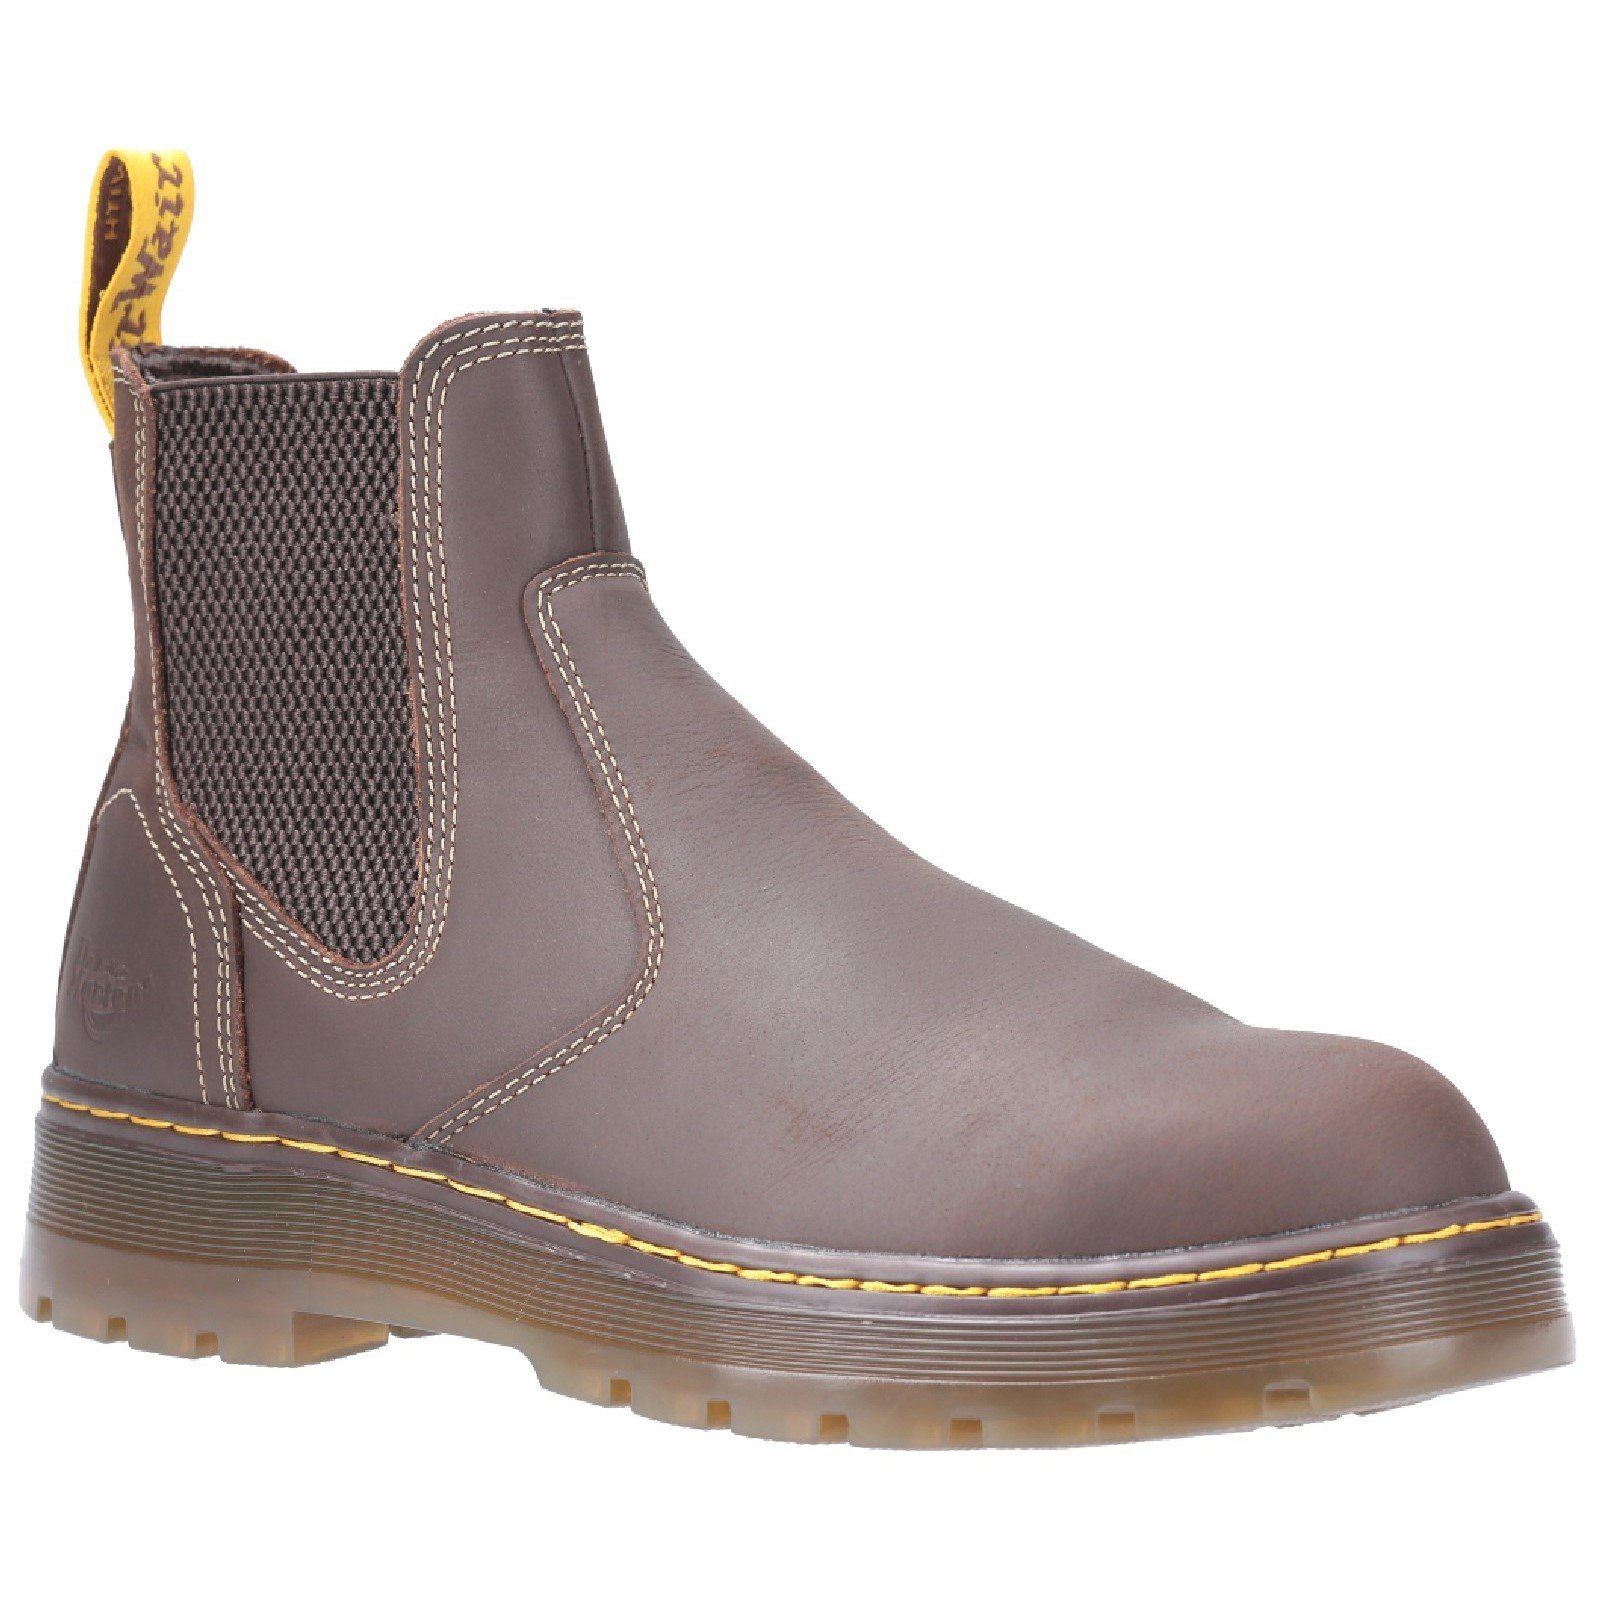 Dr Martens Unisex Eaves SB Elasticated Safety Boot Brown 29519 - Brown 9